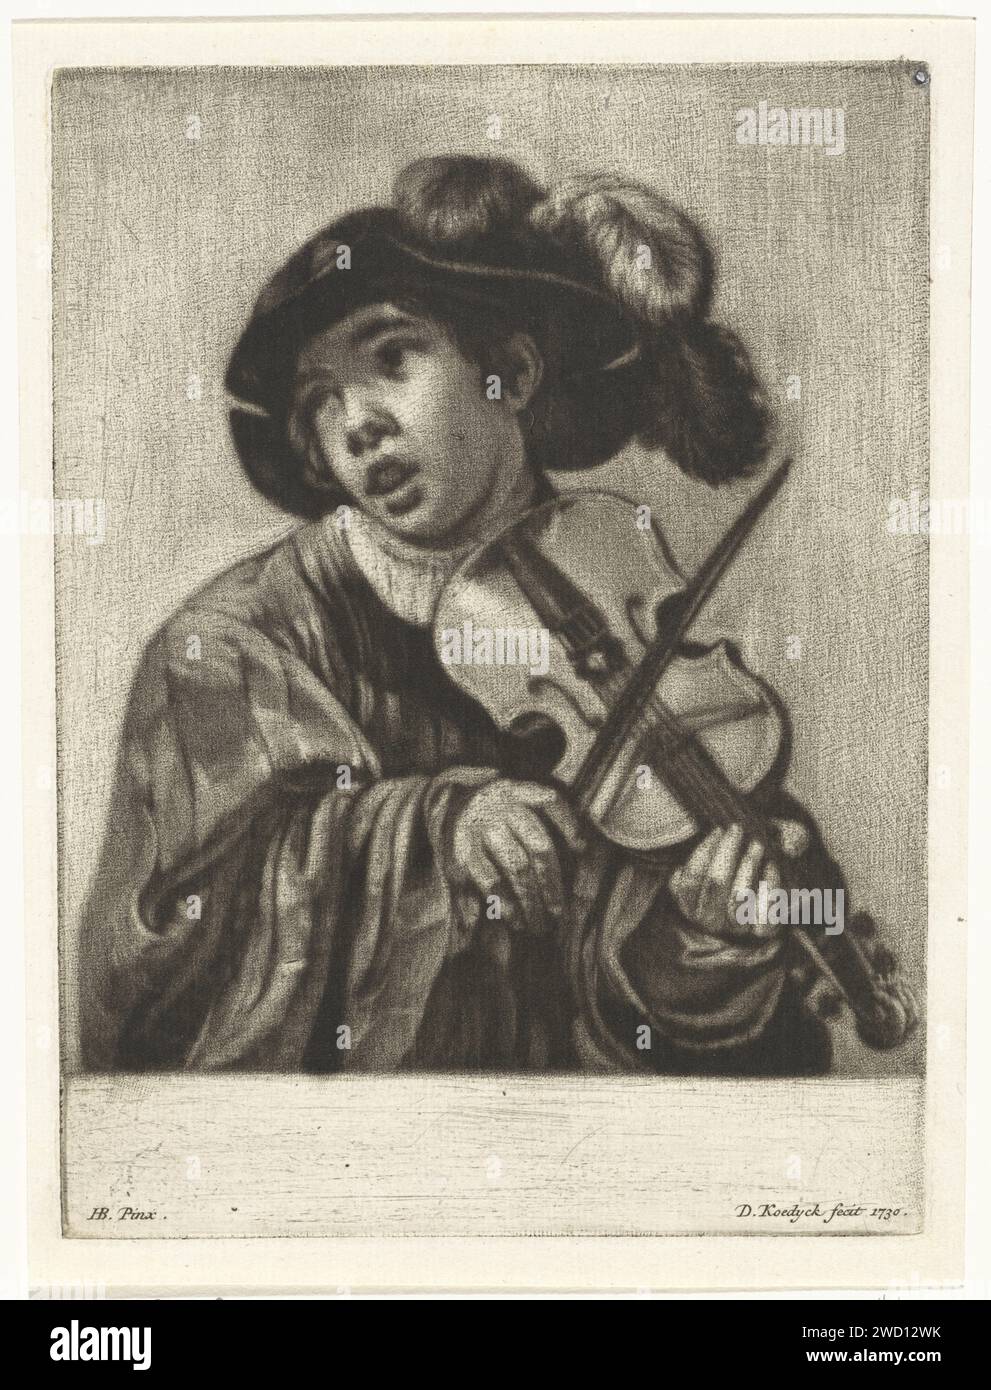 Violin player, Dirk Koedijck, after Hendrick ter Brugghen, 1730 print A boy, with a feathered hat on the head, plays a violin. Zaandam paper engraving one person playing string instrument (bowed). violin, fiddle Stock Photo